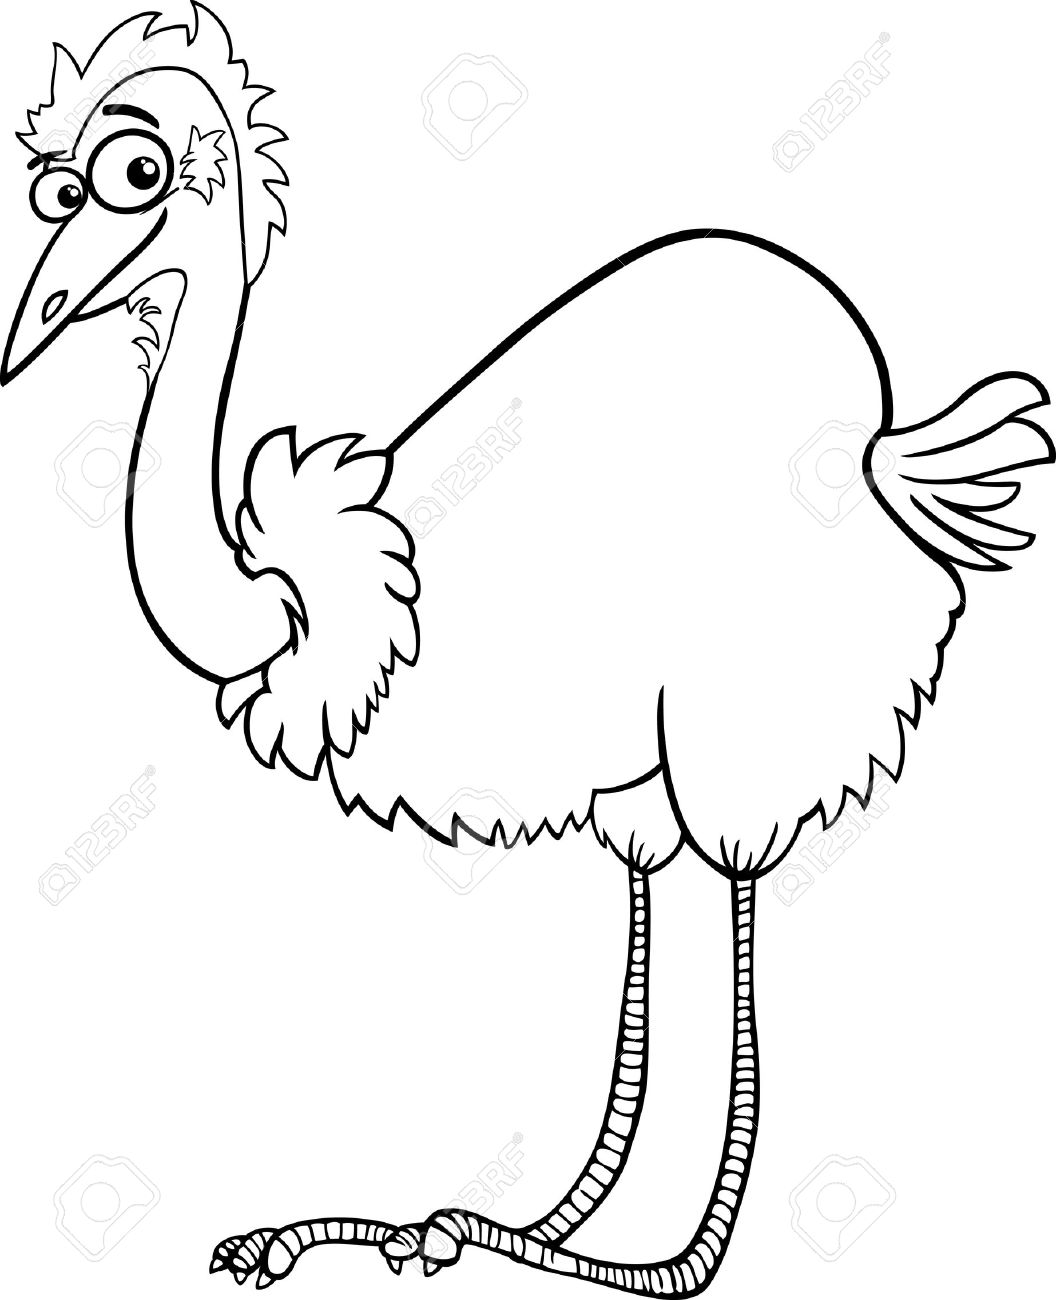 ostrich clipart black and white